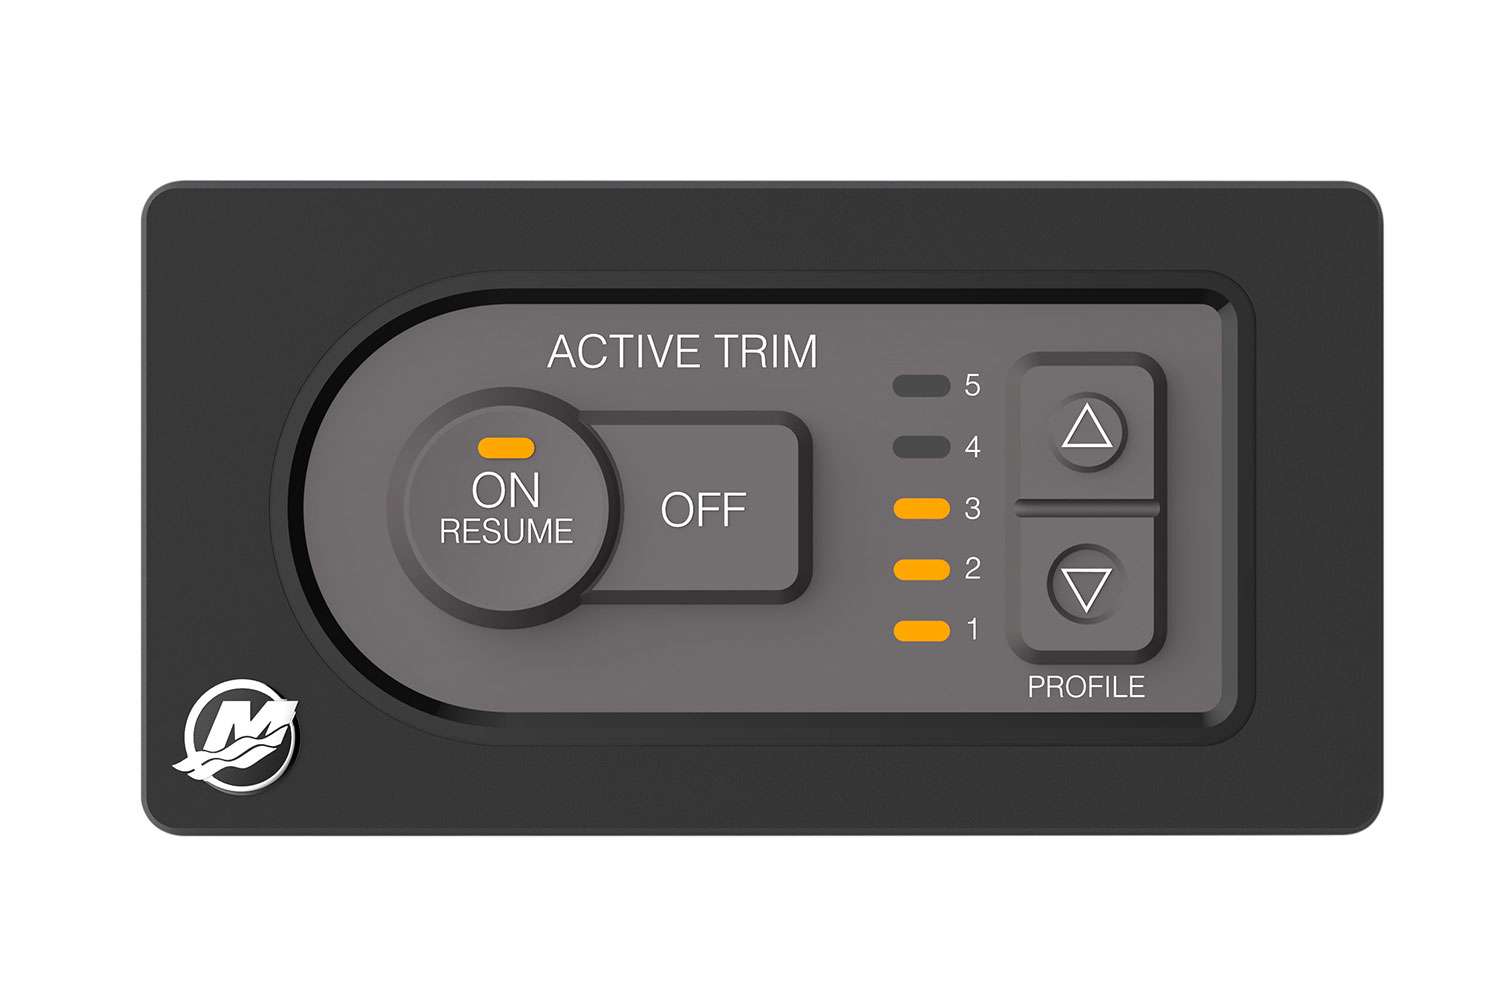 <p><b>Mercury Active Trim</b></p> Active Trim is an integrated GPS speed-based system that improves your time on the water by automatically trimming your boat engine(s). Active Trim is the only auto trim system that controls trim angle according to boat speed and engine rpm. Itâs also the only system with five selectable trim profiles that allows the operator to personalize Active Trim to a driving style and/or changes in boat load and weather conditions.</p>  